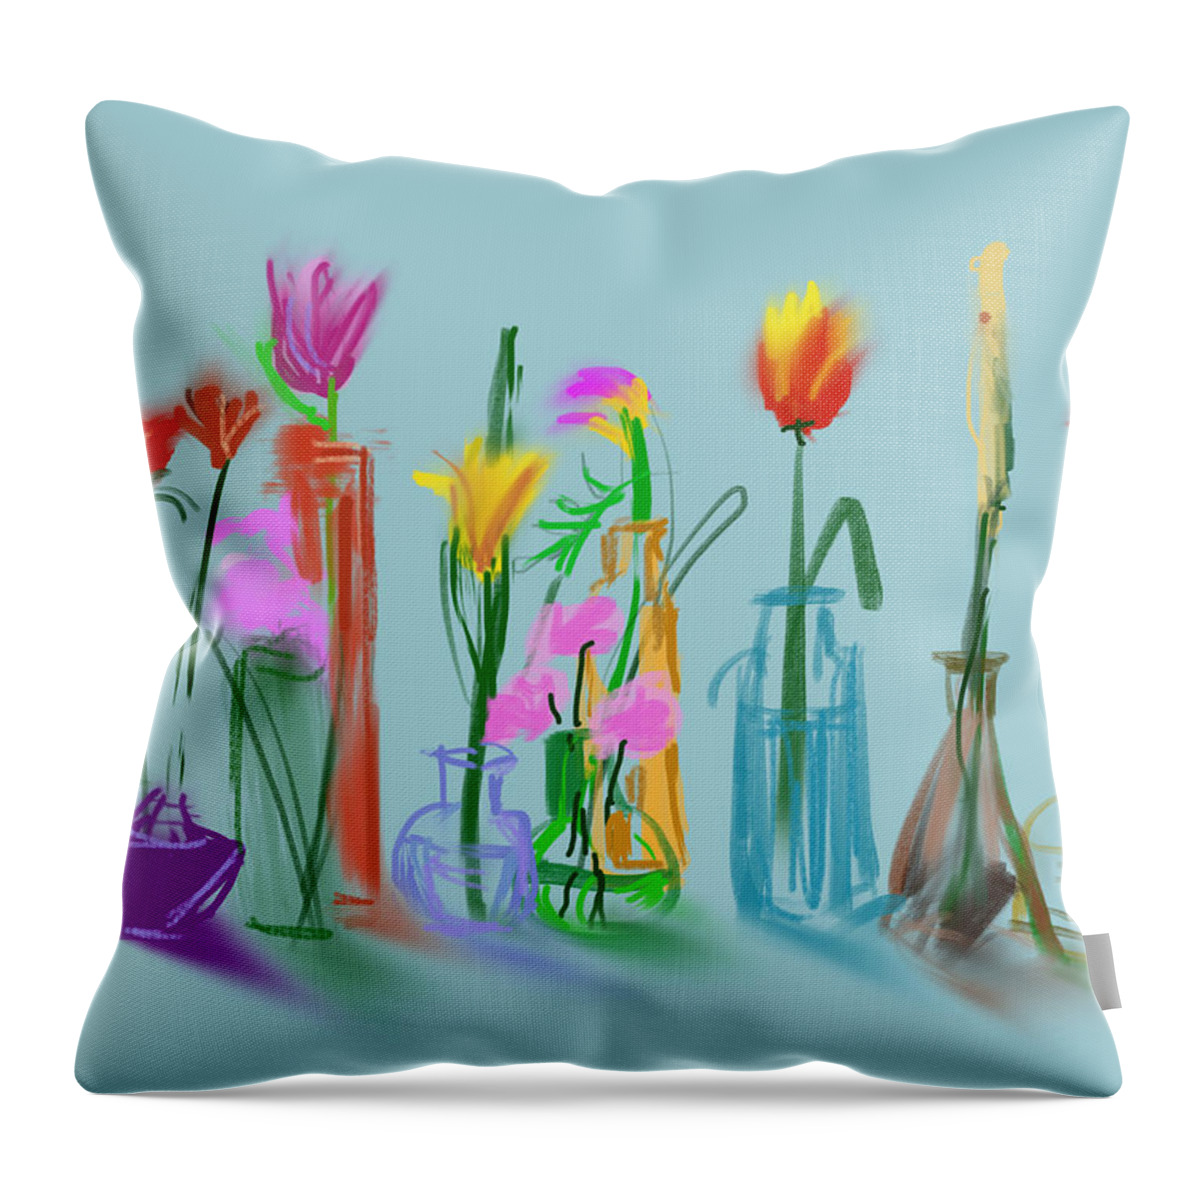 Digital Throw Pillow featuring the digital art There Are Always Flowers For Those Who Want To See Them by Bonny Butler